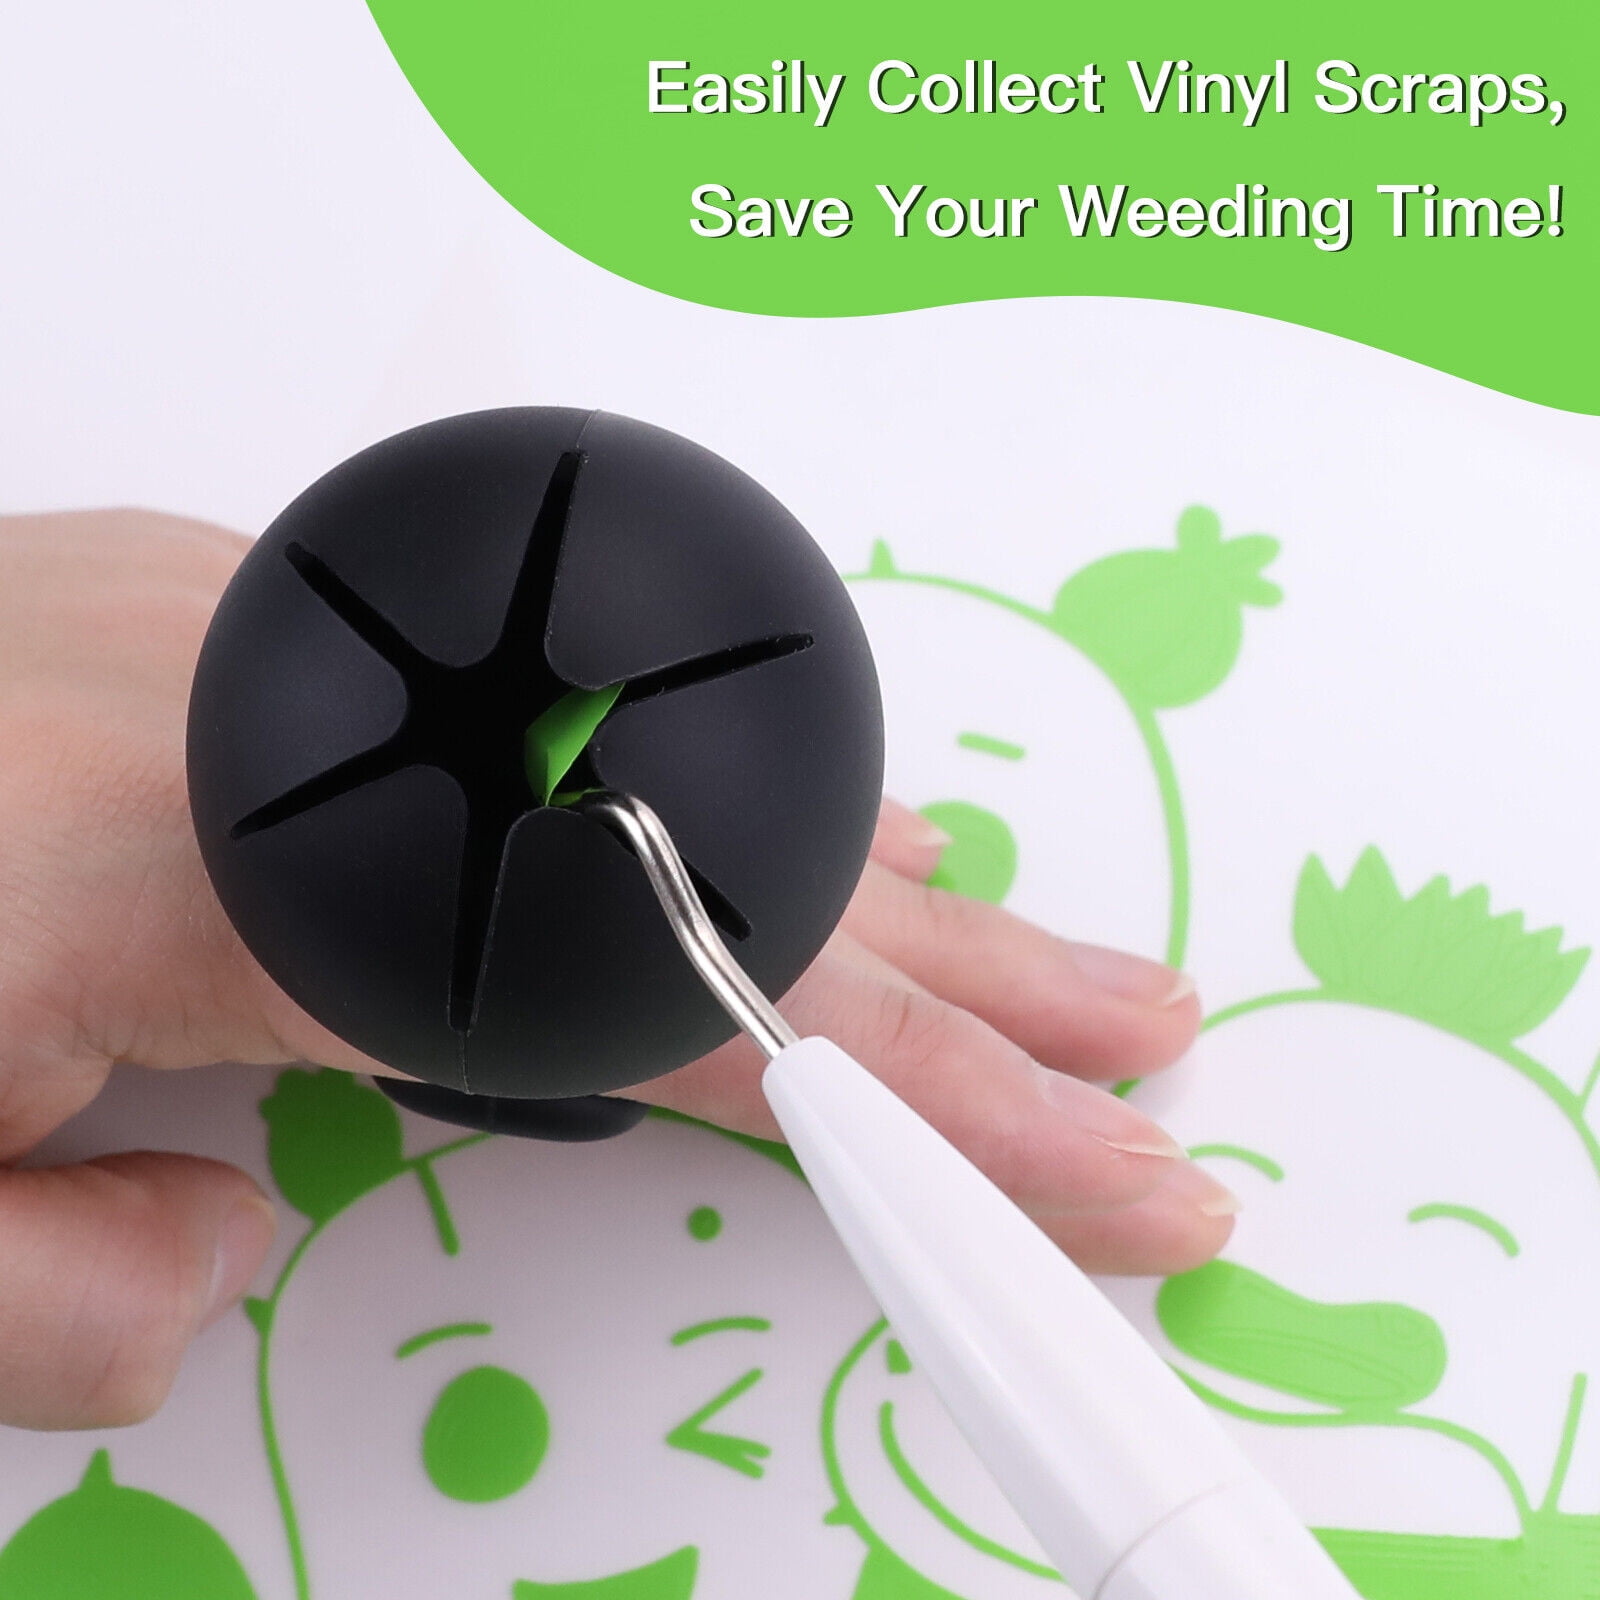 Generic 2 Pcs Suctioned Vinyl Weeding Scrap Collector Silicone Suction Cups  for Vinyl Disposing Craft Weeding Tools Holder Set B @ Best Price Online